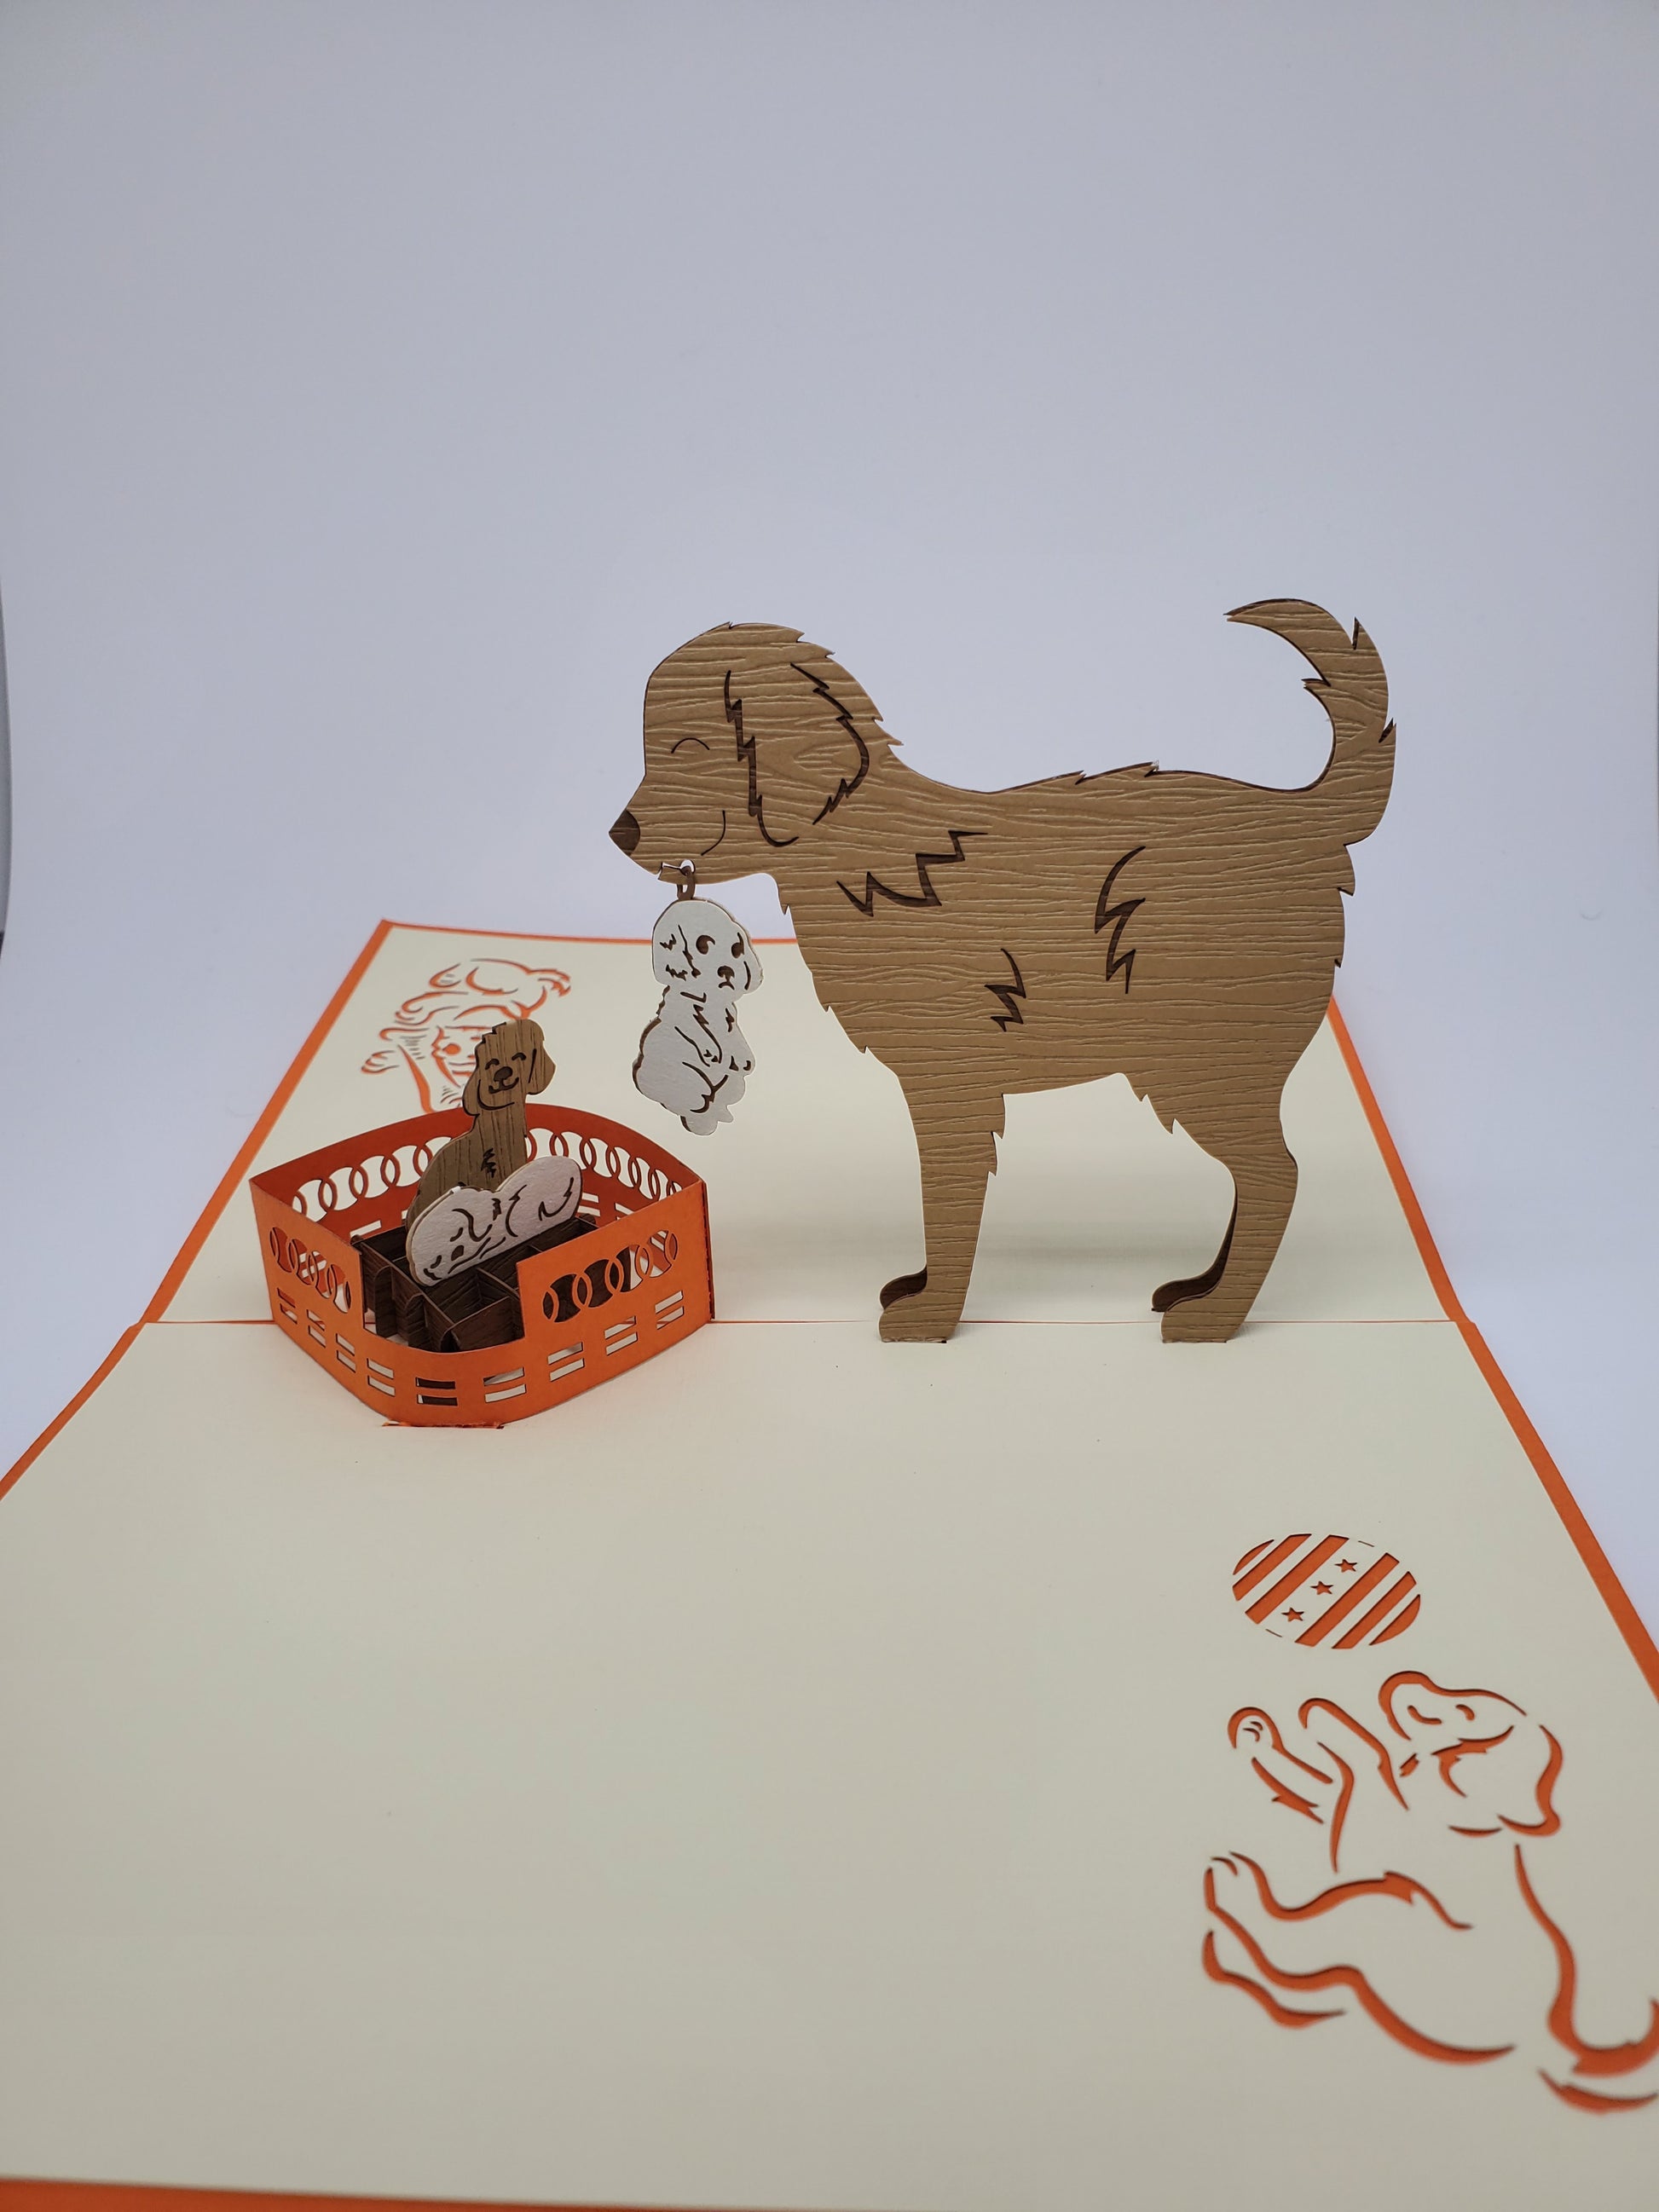 Mother Dog and Puppies 3D Pop Up Card